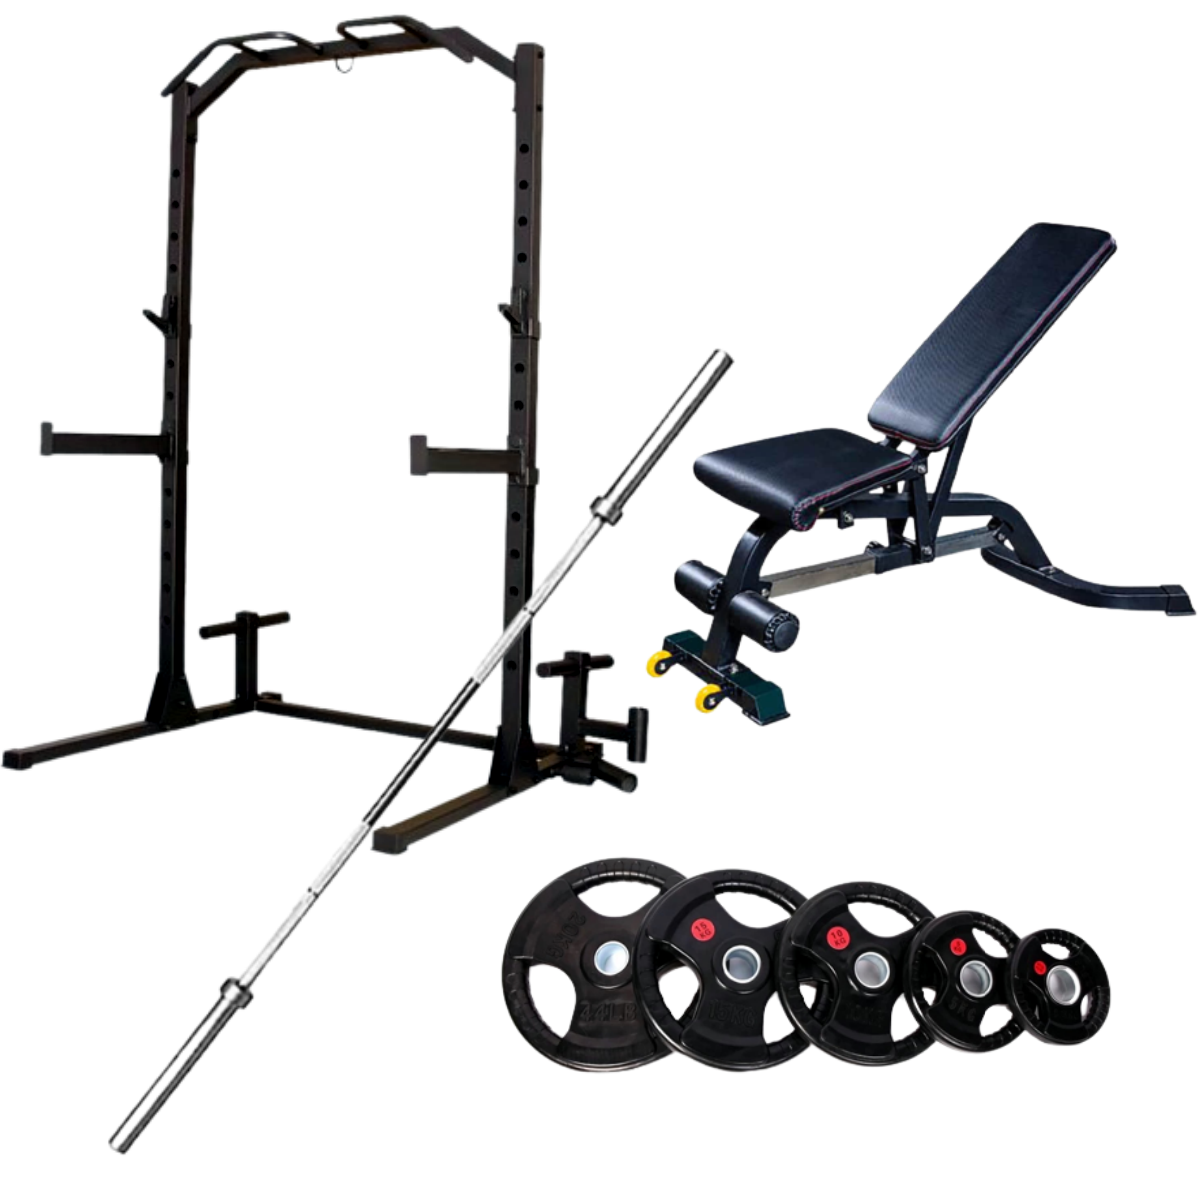 squat rack with bench and barbell set